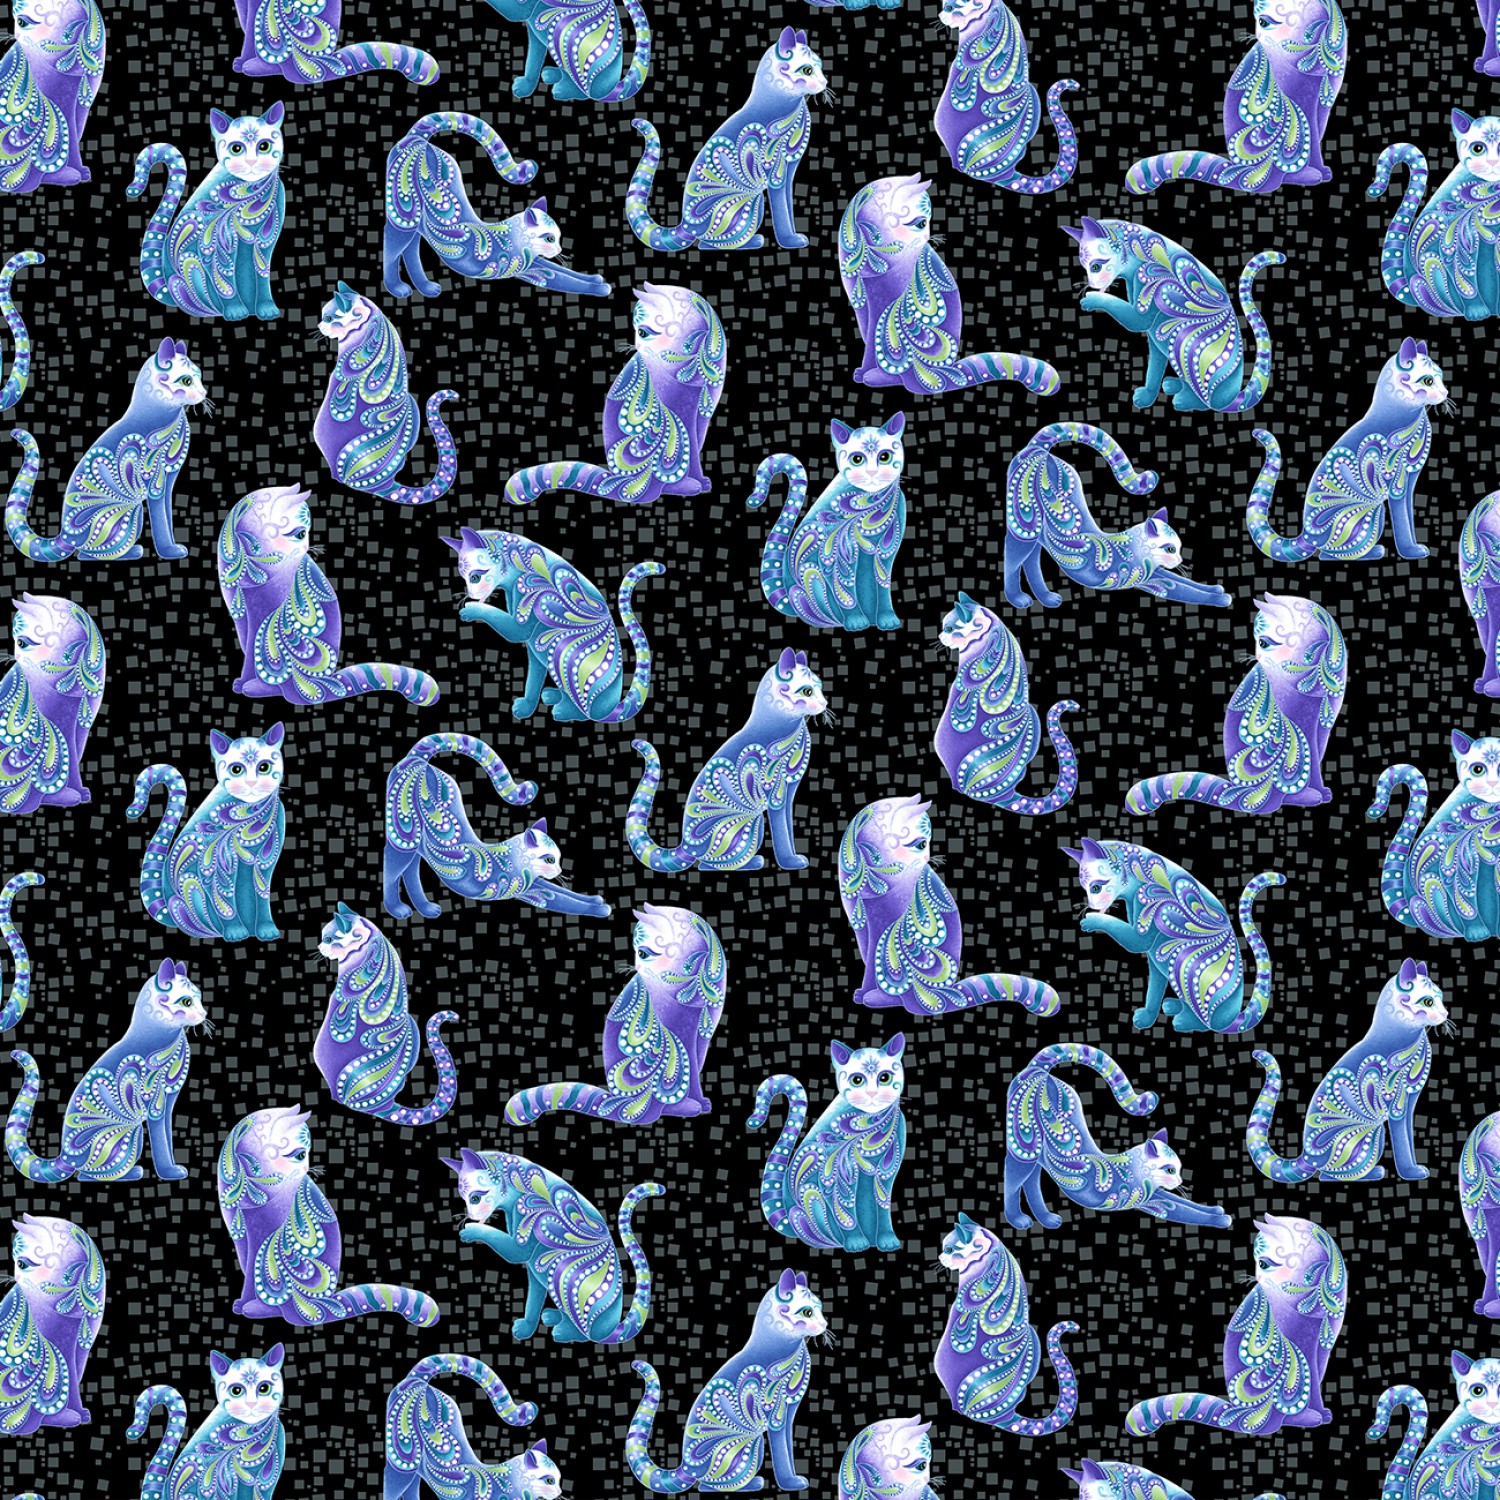 Arist O Cats Catitute Singing the Blues Fabric with Metallic